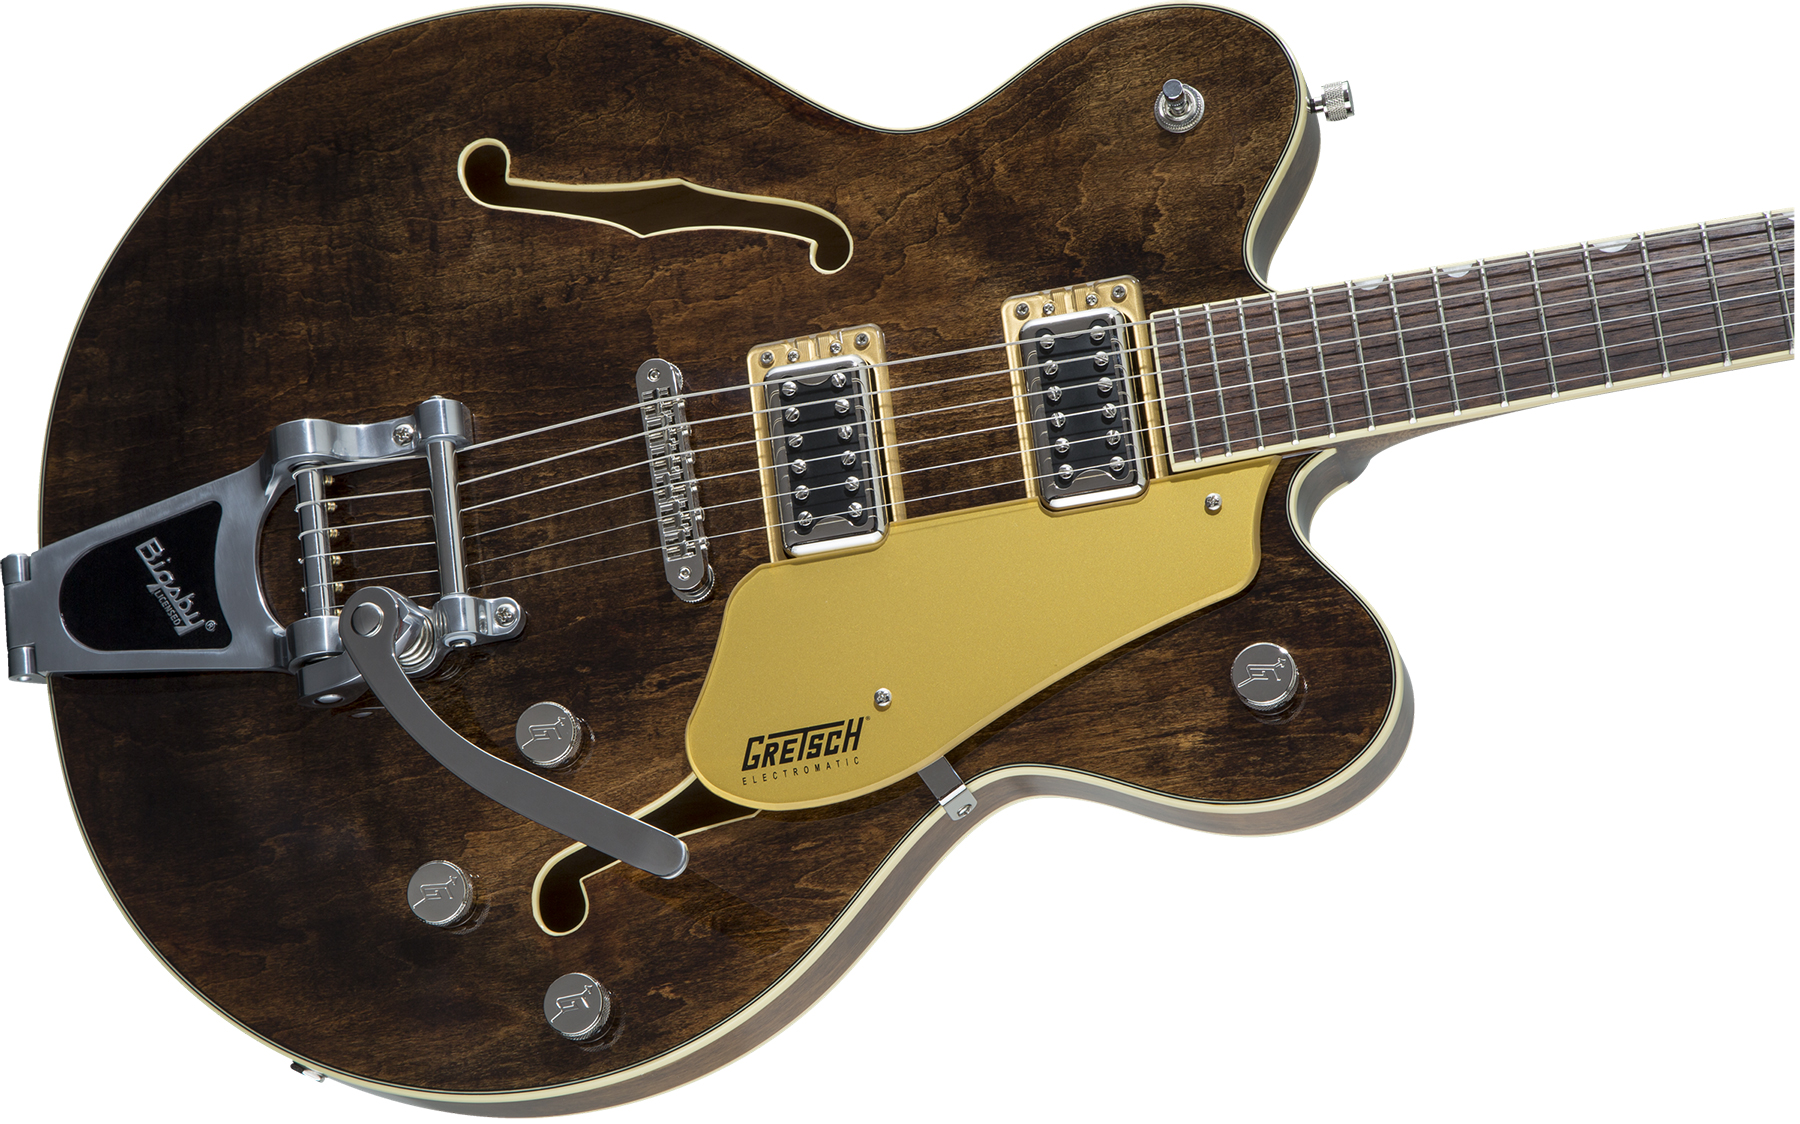 Gretsch G5622t Center Bloc Double Cut Bigsby Electromatic 2019 Hh Lau - Imperial Stain - Semi-hollow electric guitar - Variation 2